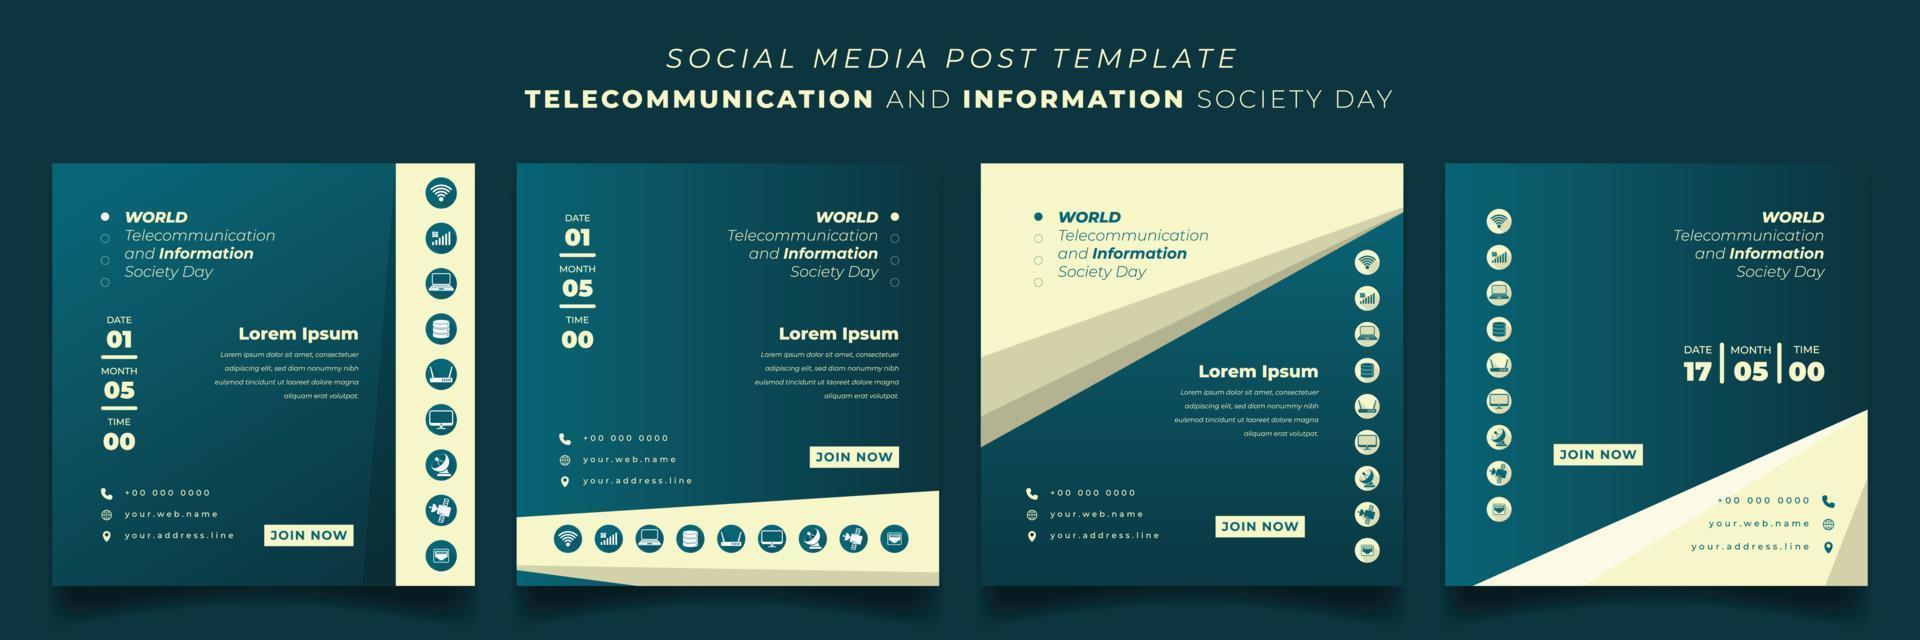 Set of social media post template for Information and Telecommunication design in square background vector